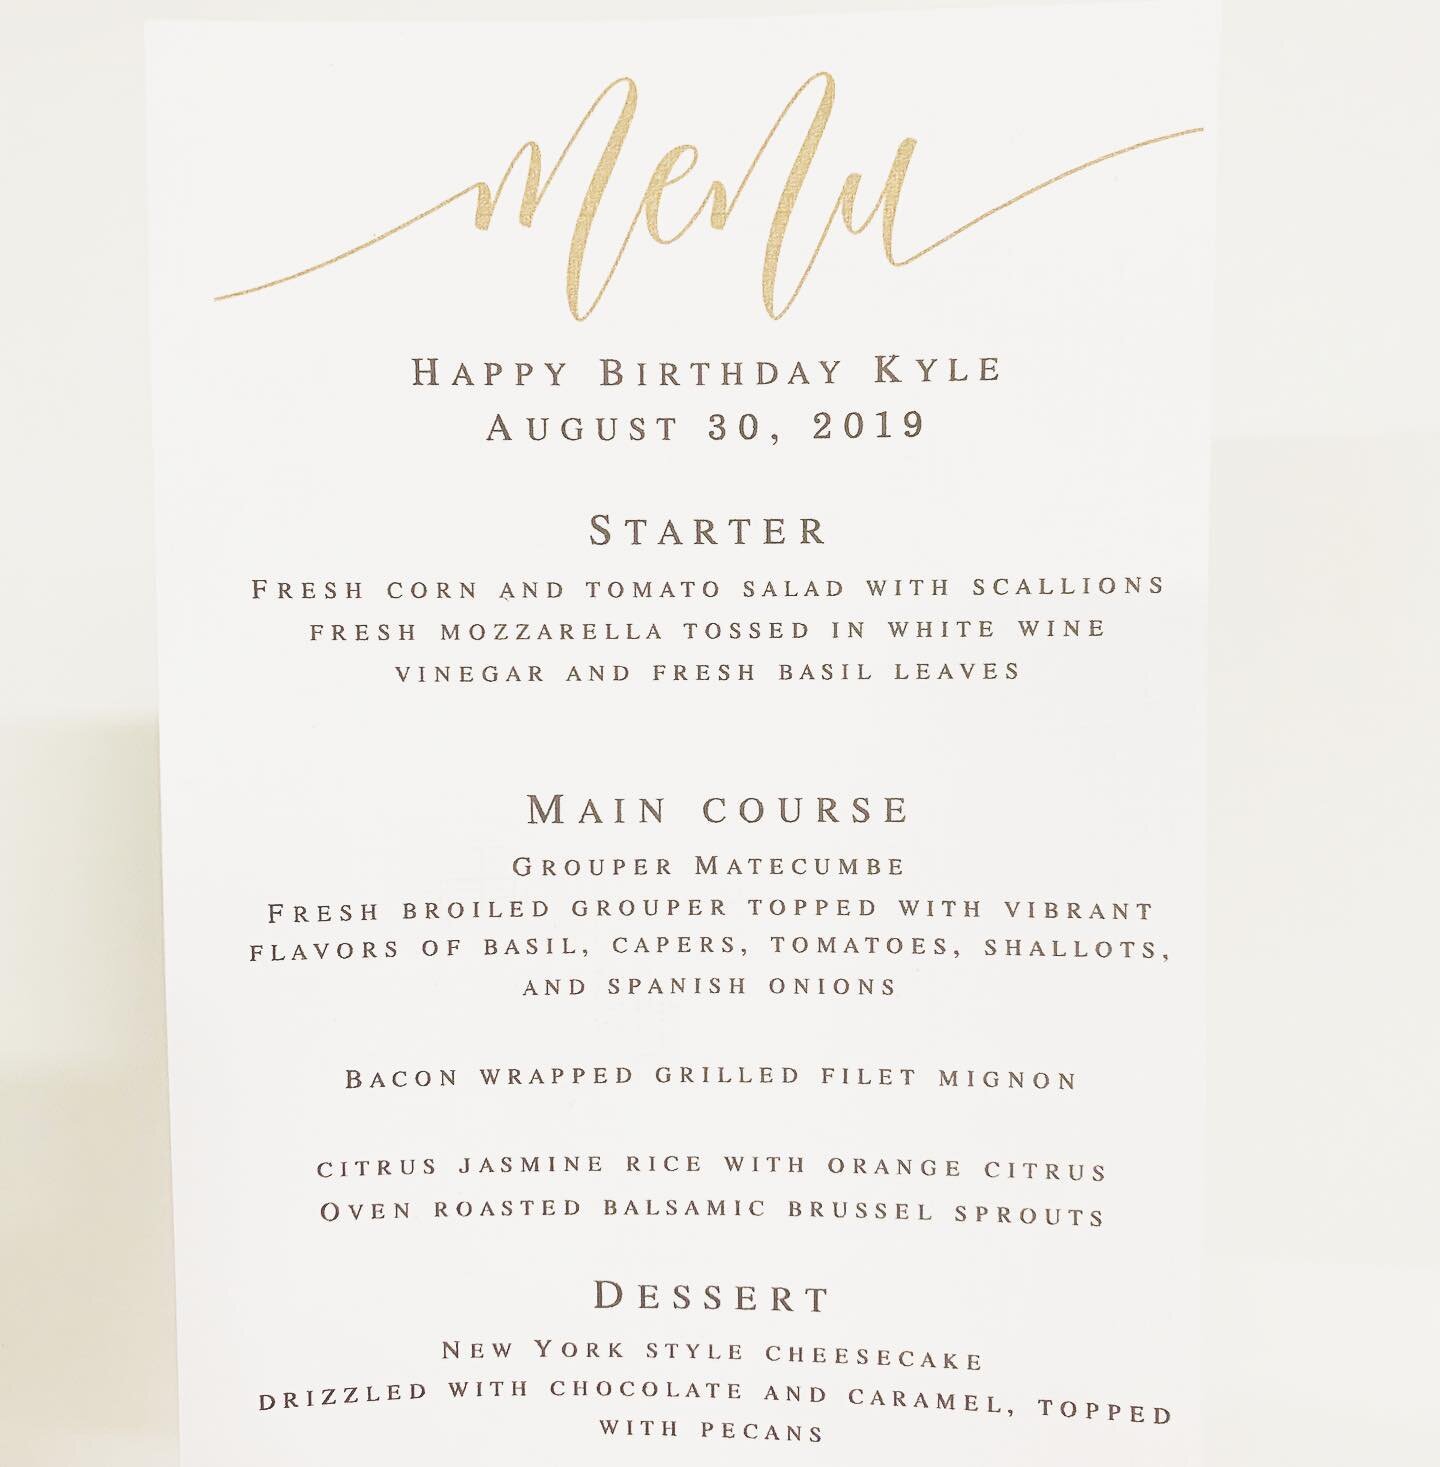 LOVING this elevated dinner party menu // fresh grouper + filet mignon 🍽